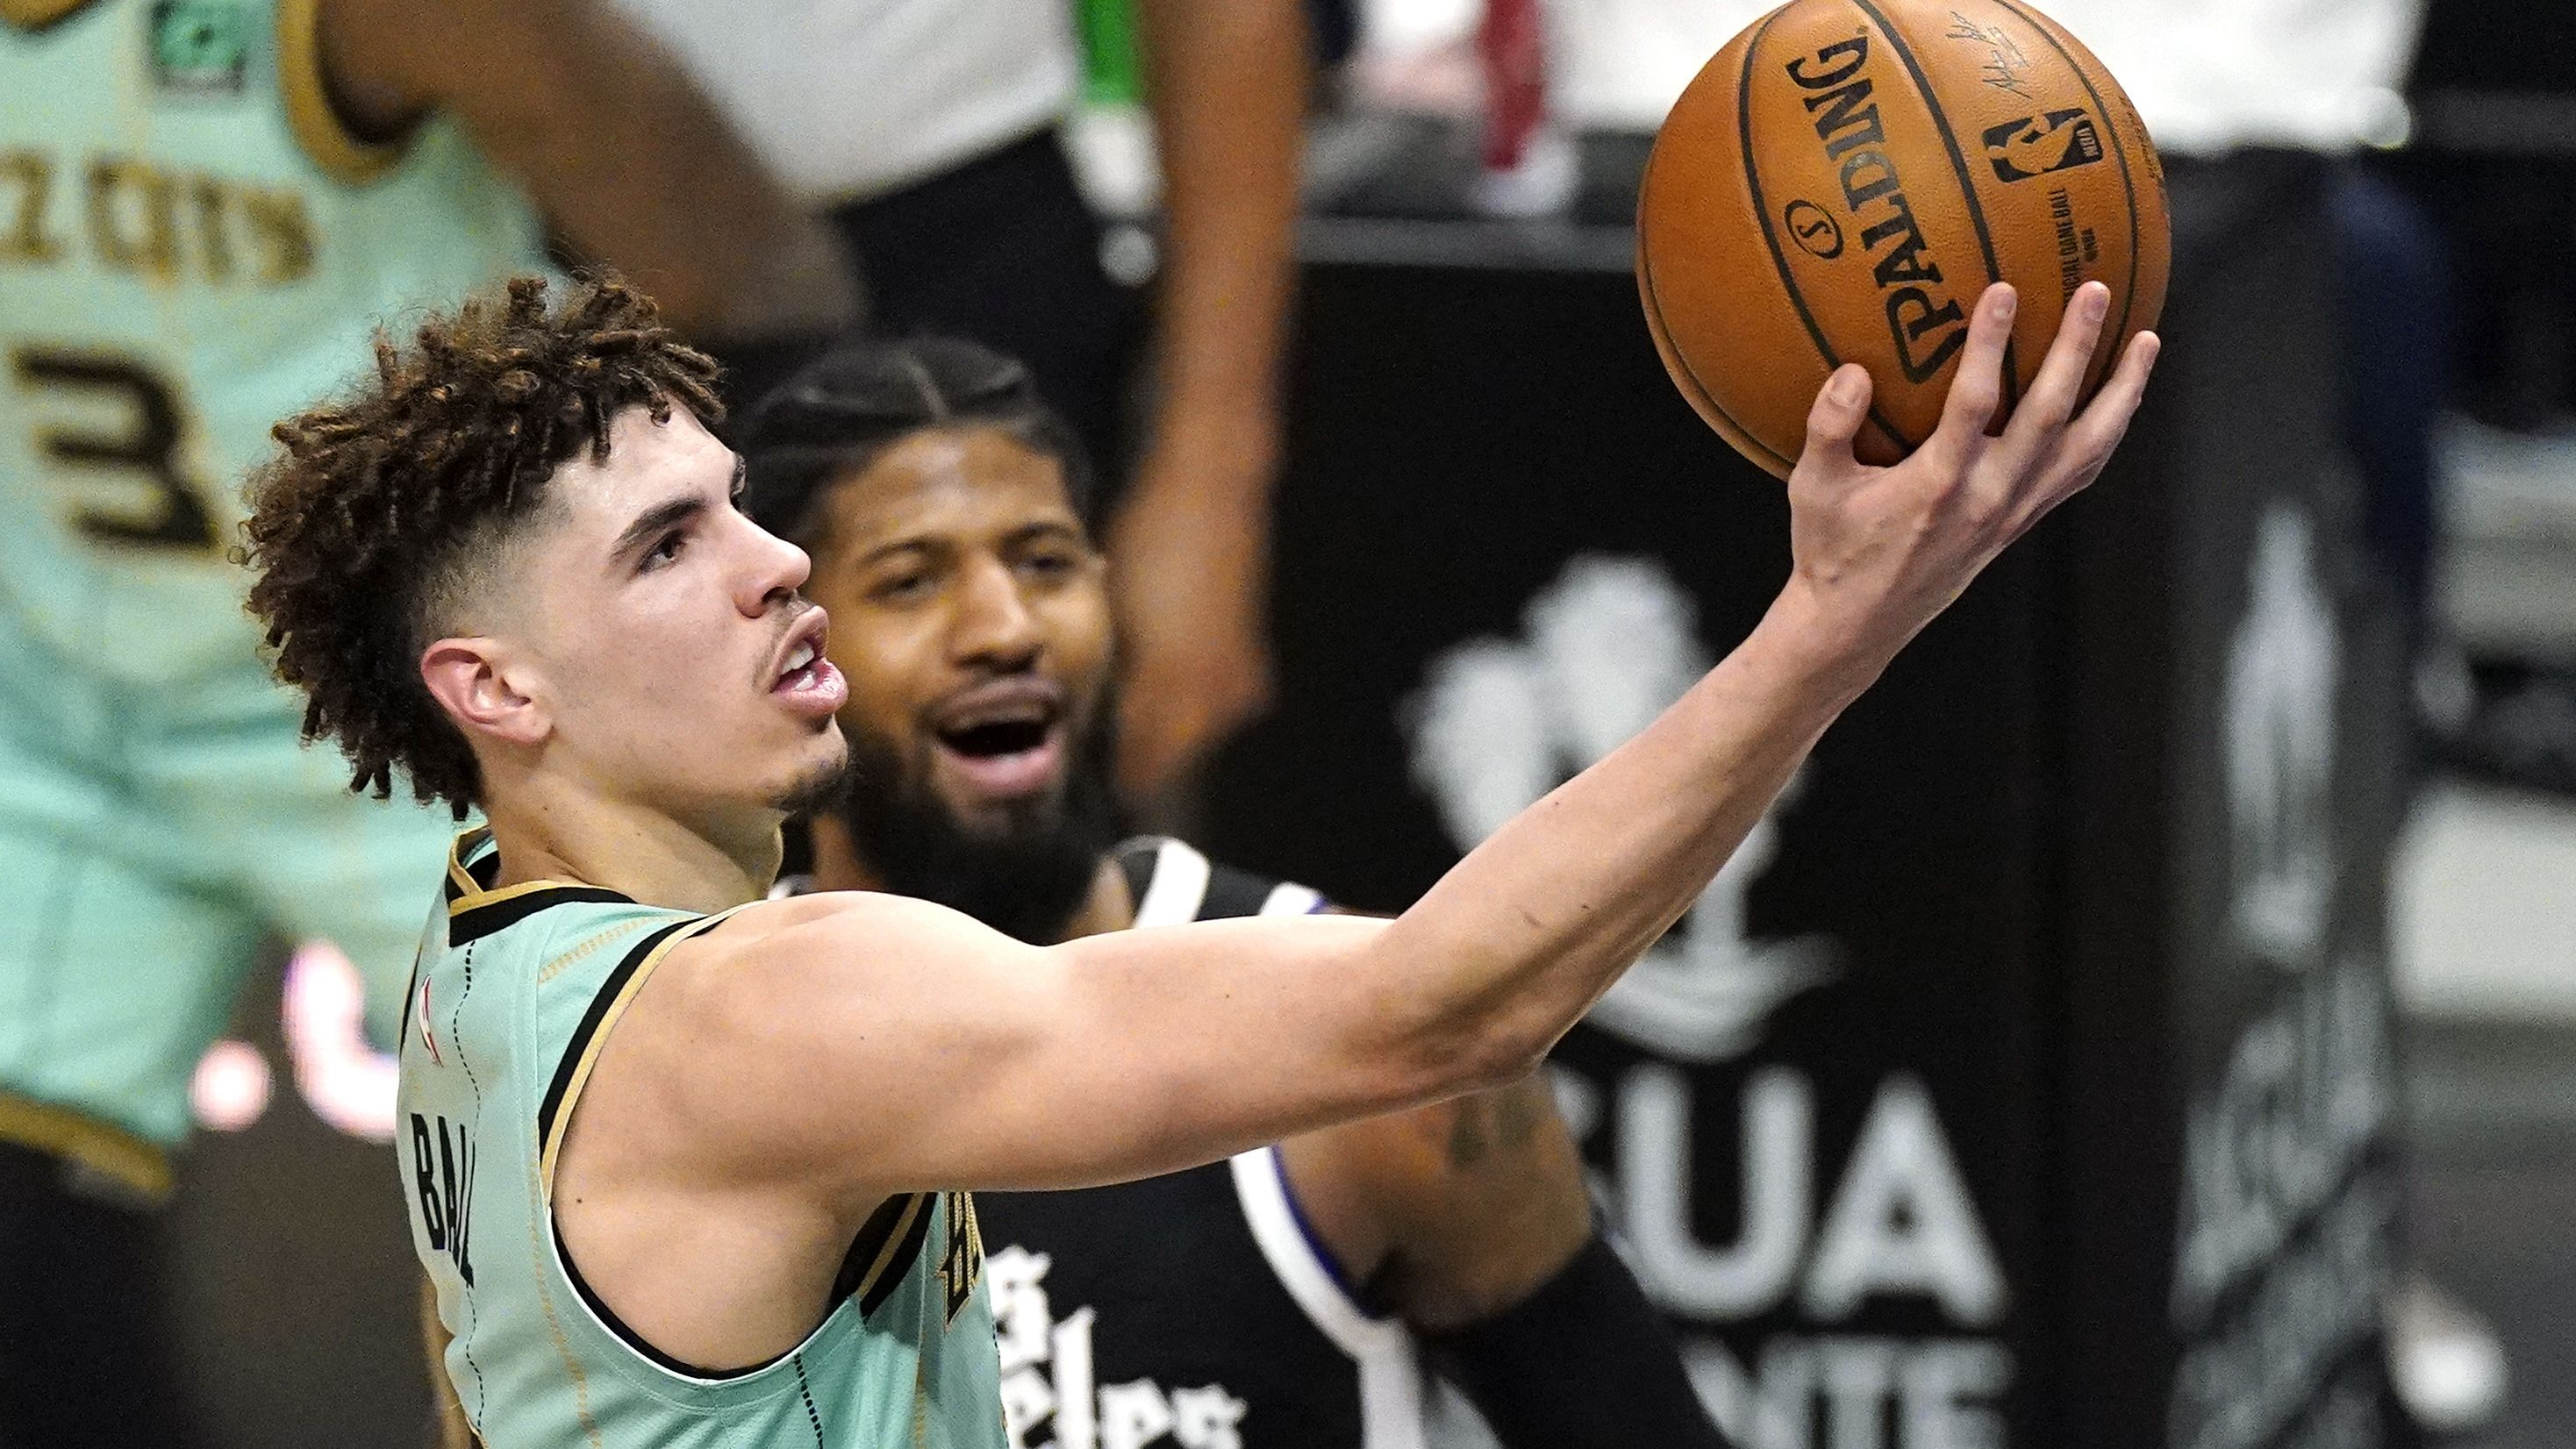 NBA rookie of the year frontrunner LaMelo Ball to miss rest of season with injury